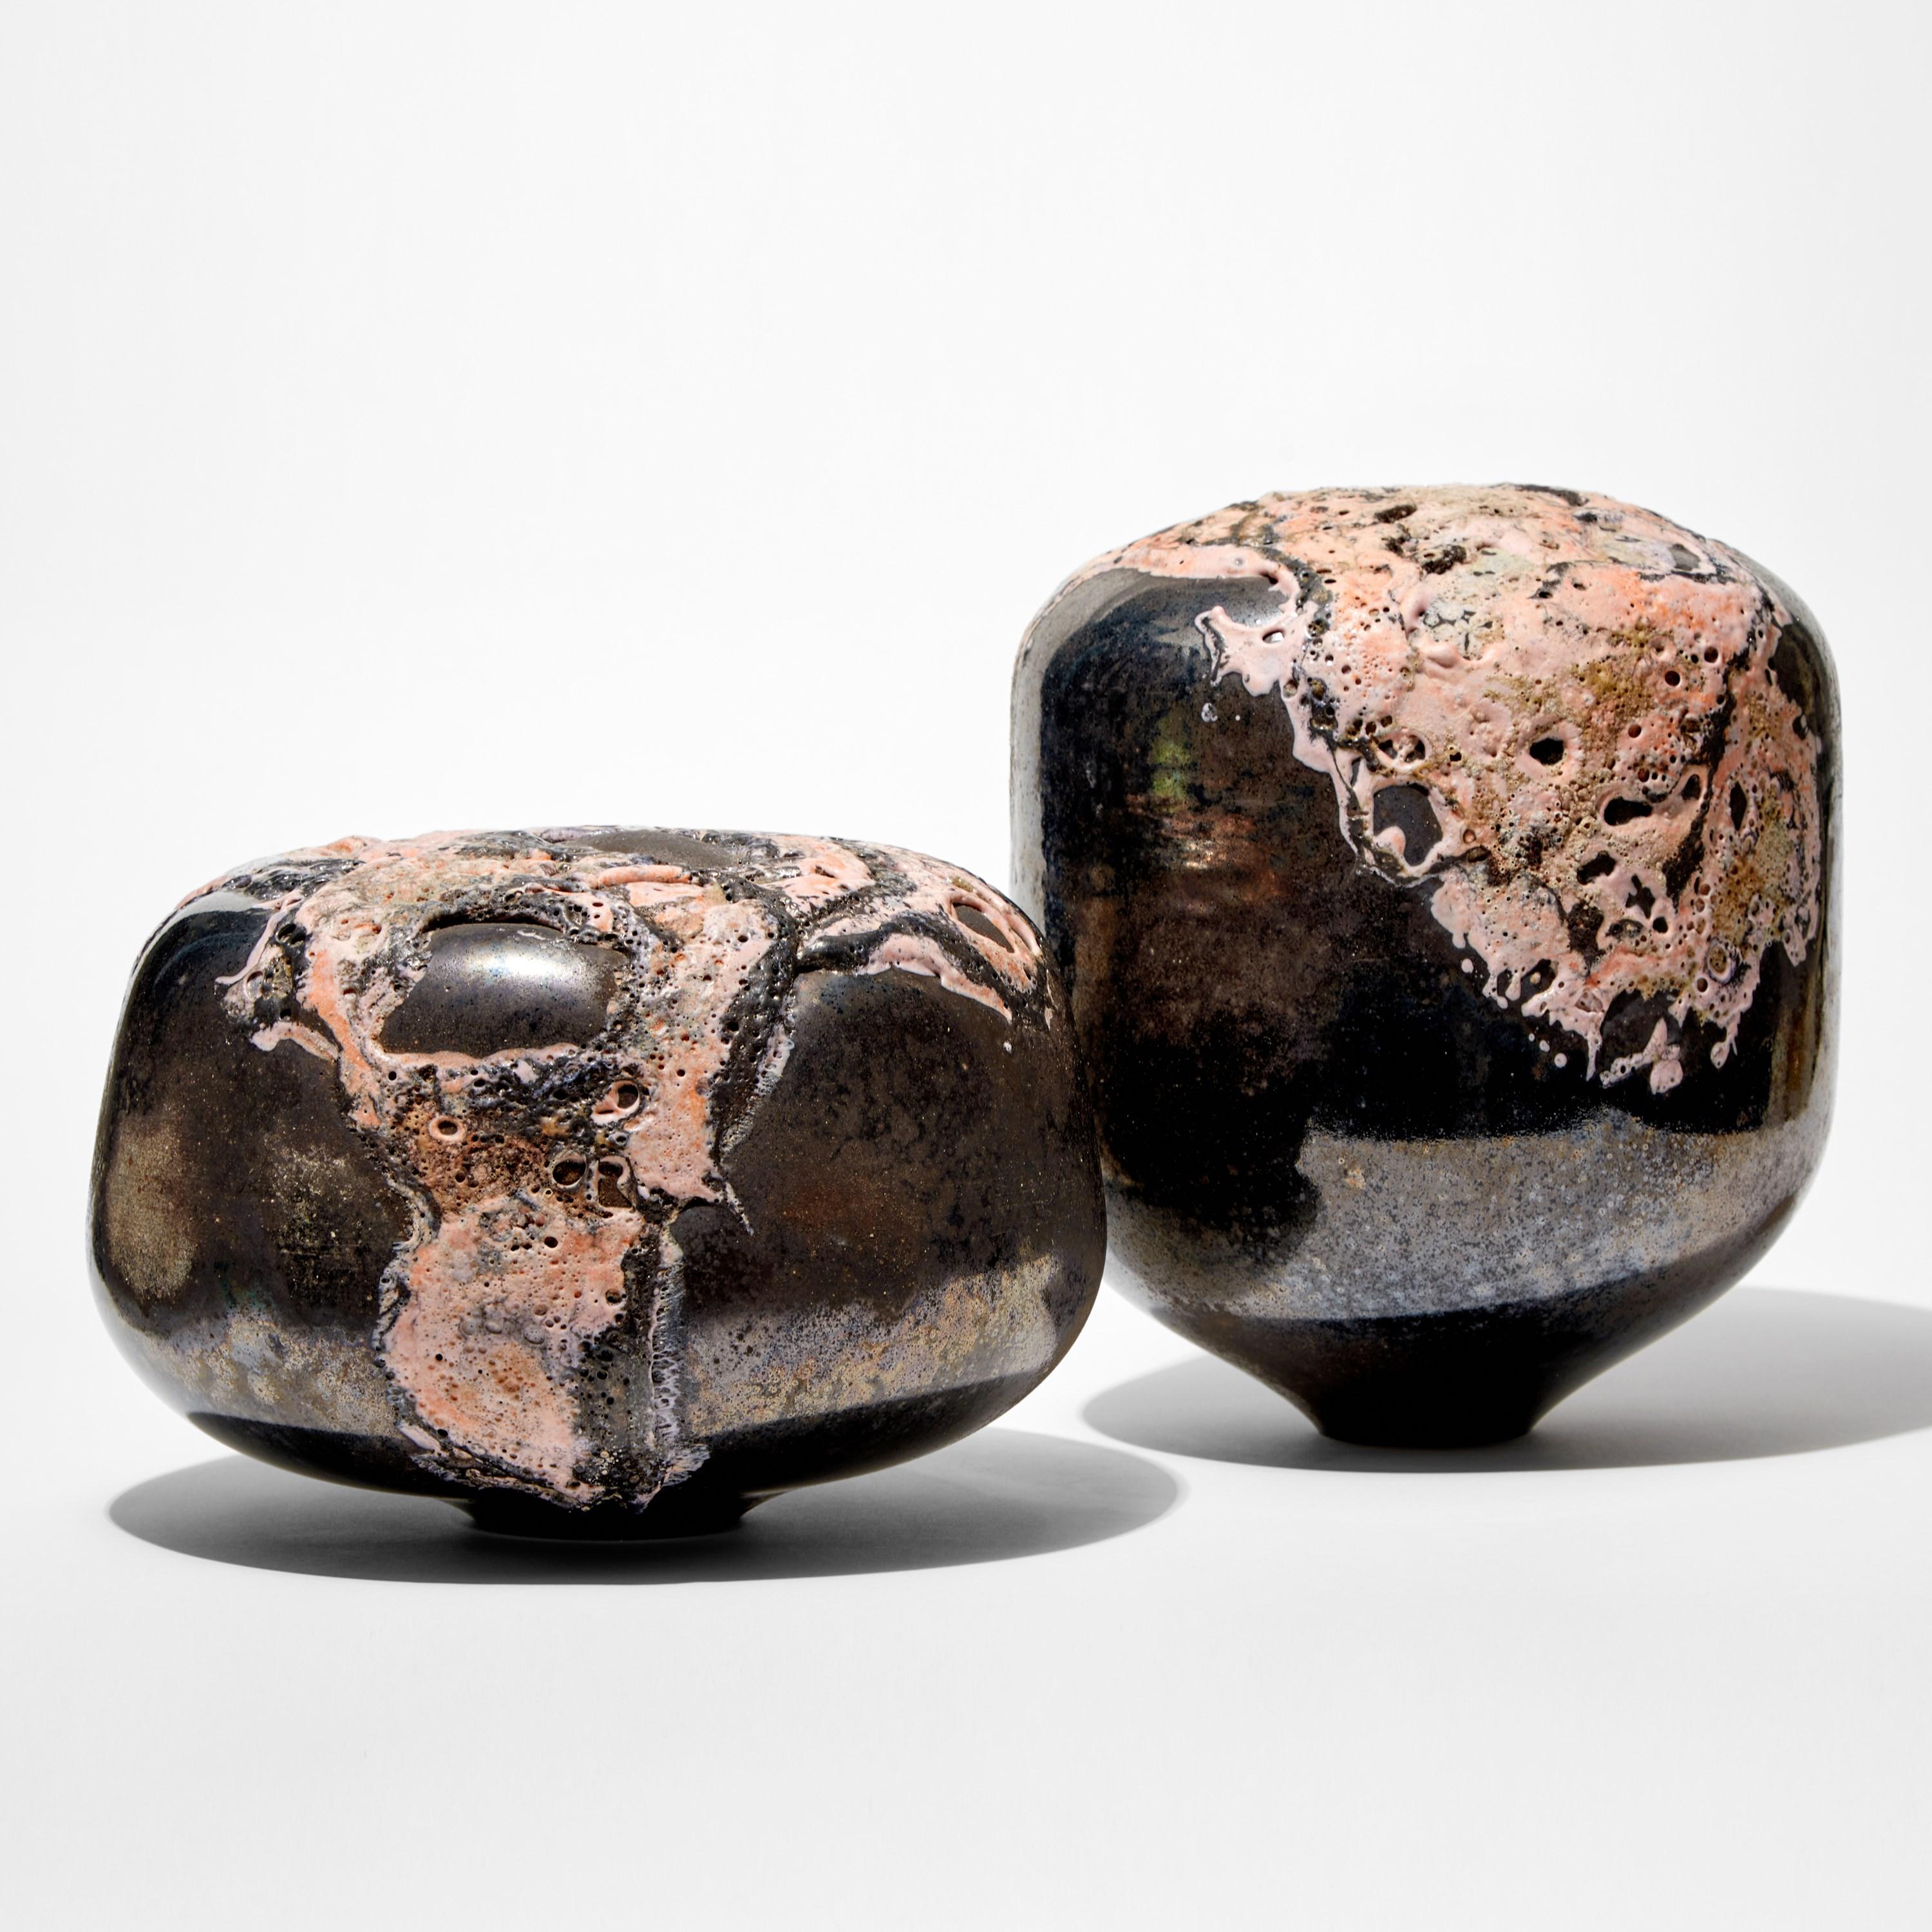 Hand-Crafted Voir in Pink II, a Bronze & Peach Abstract Glass Sculpture by Morten Klitgaard For Sale